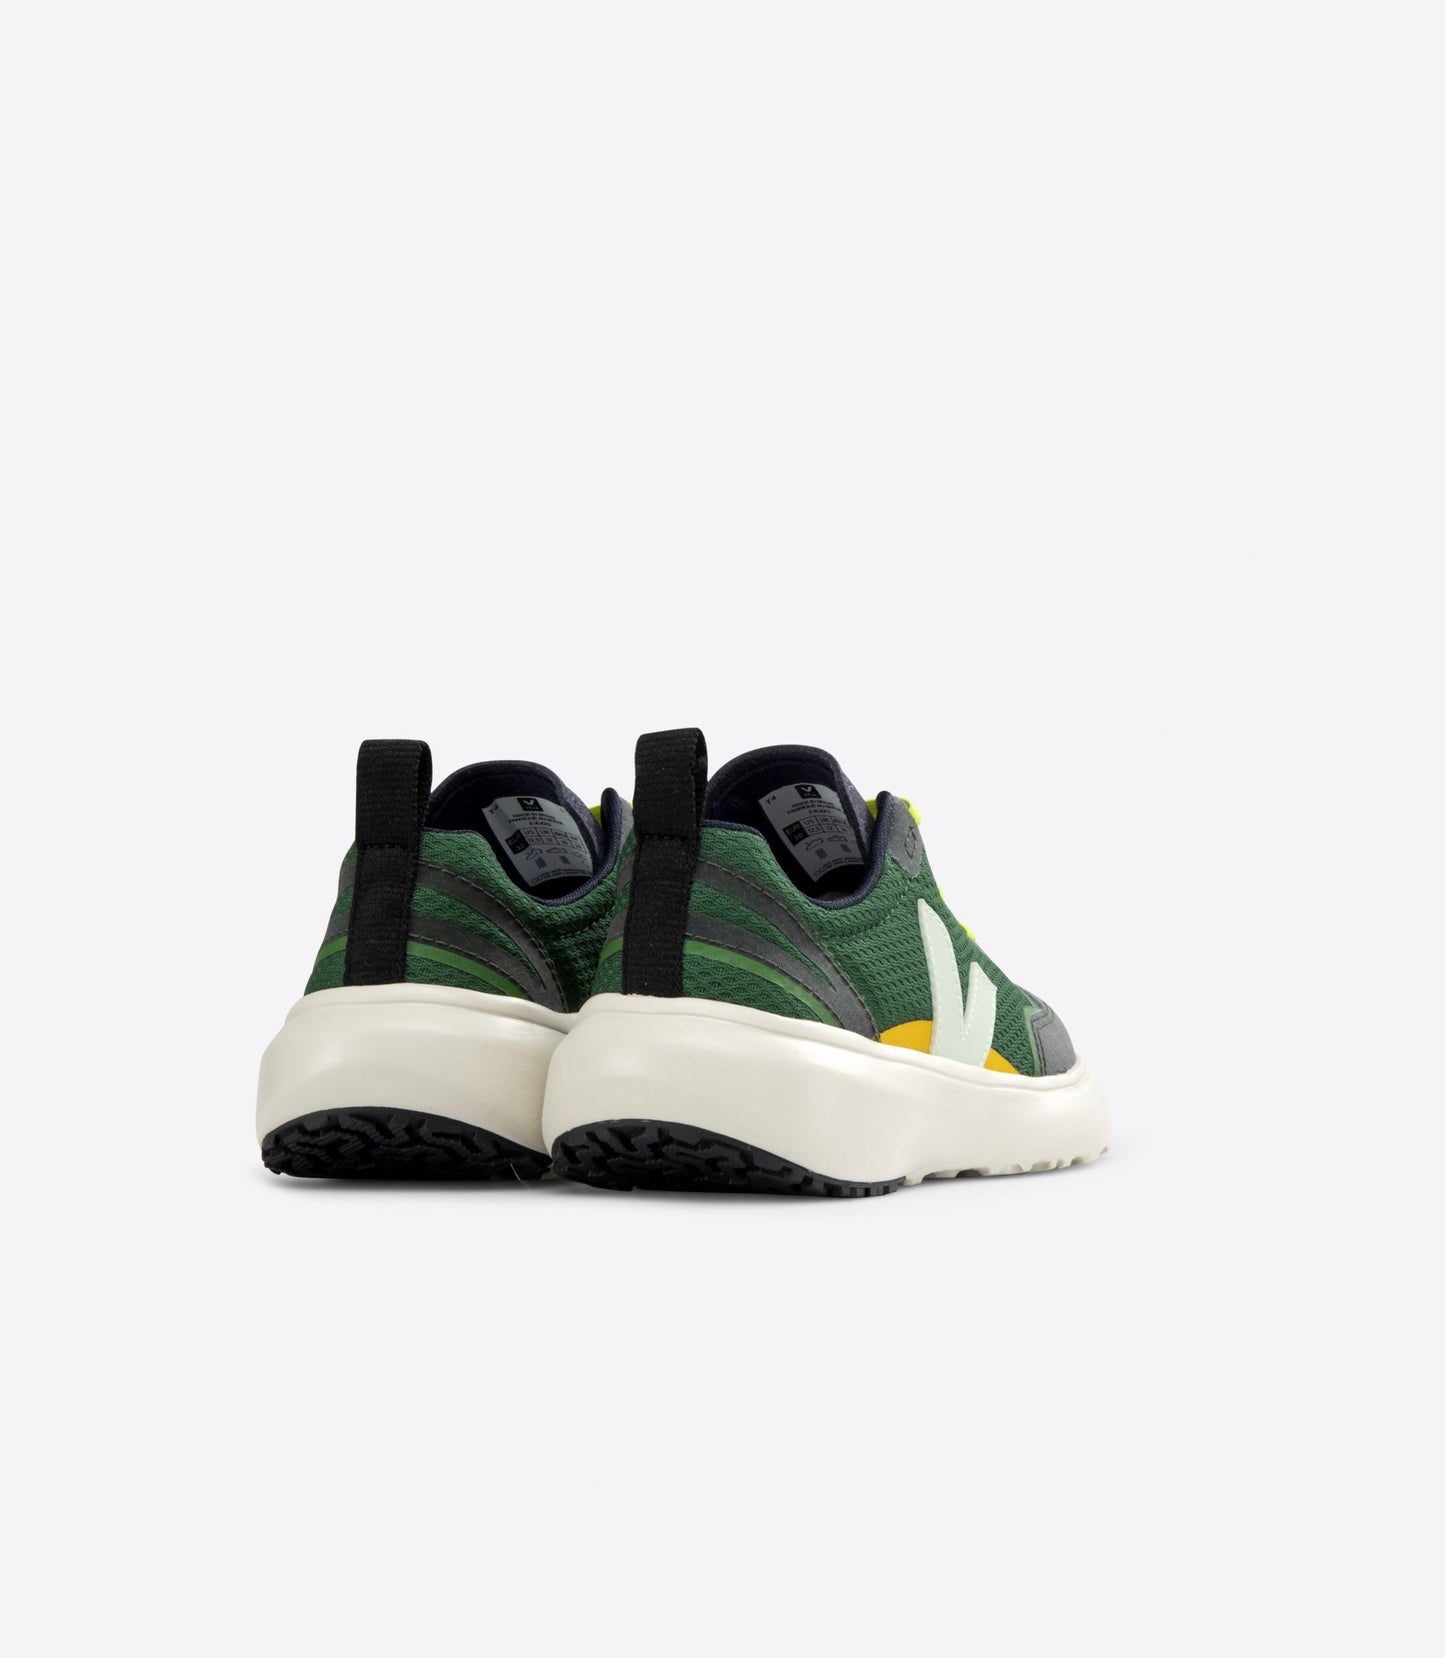 Veja Canary Elastic Laces in Poker Jade